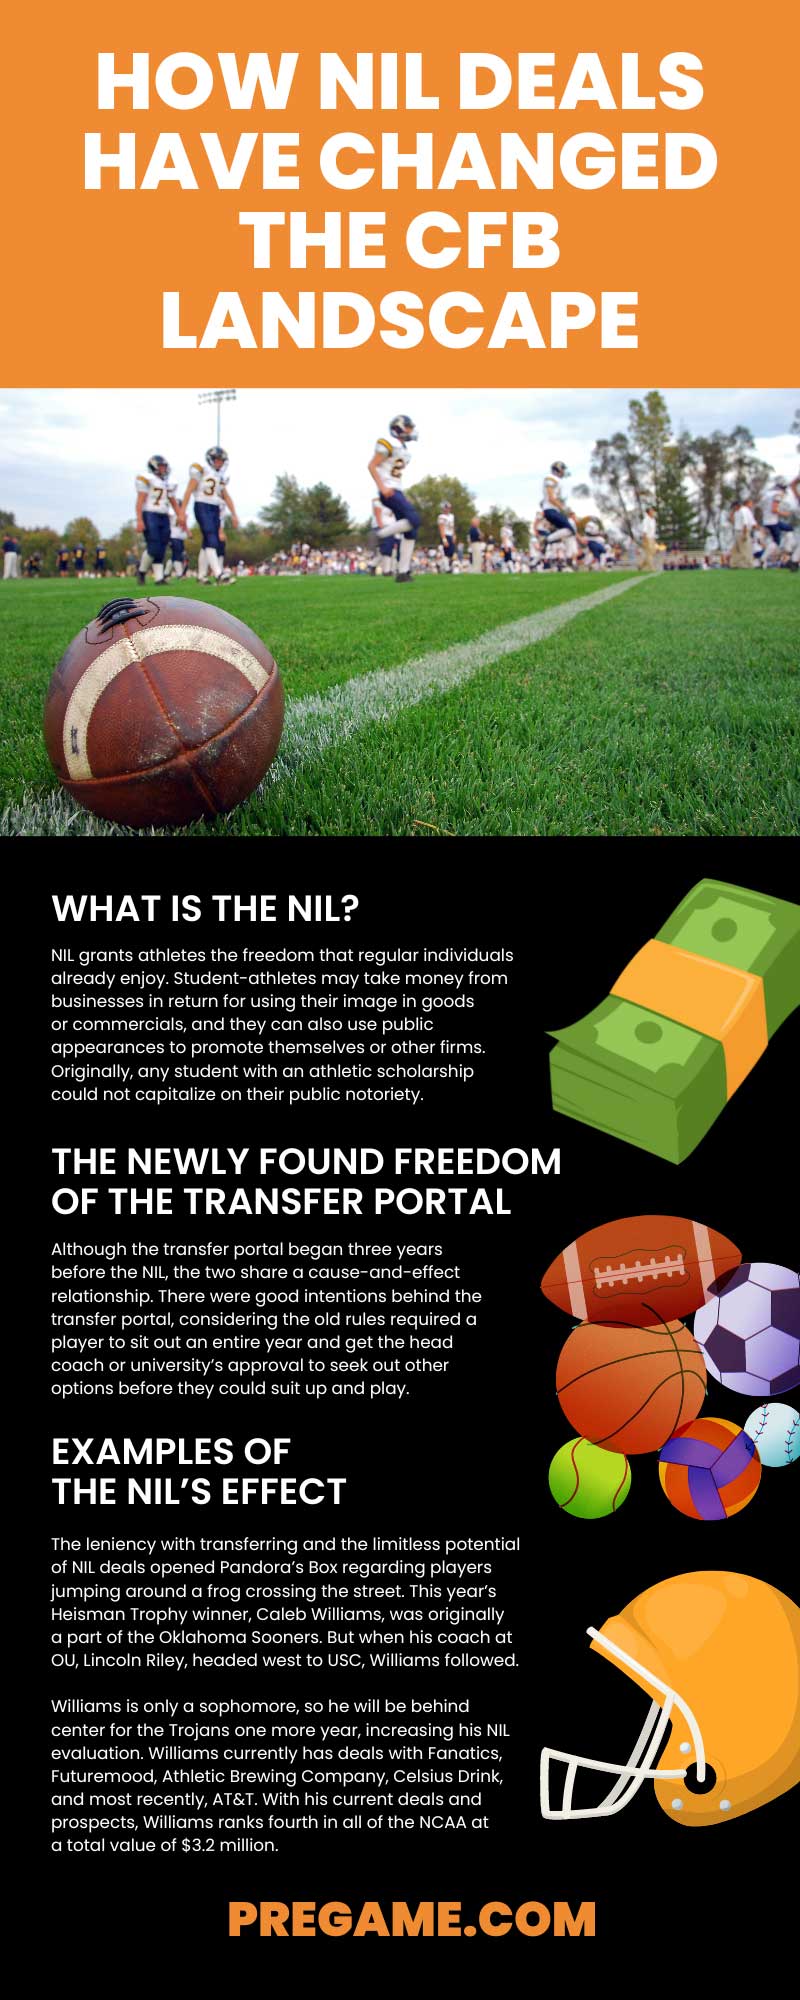 A Look at Recent Changes to the NIL Landscape for Student Athletes